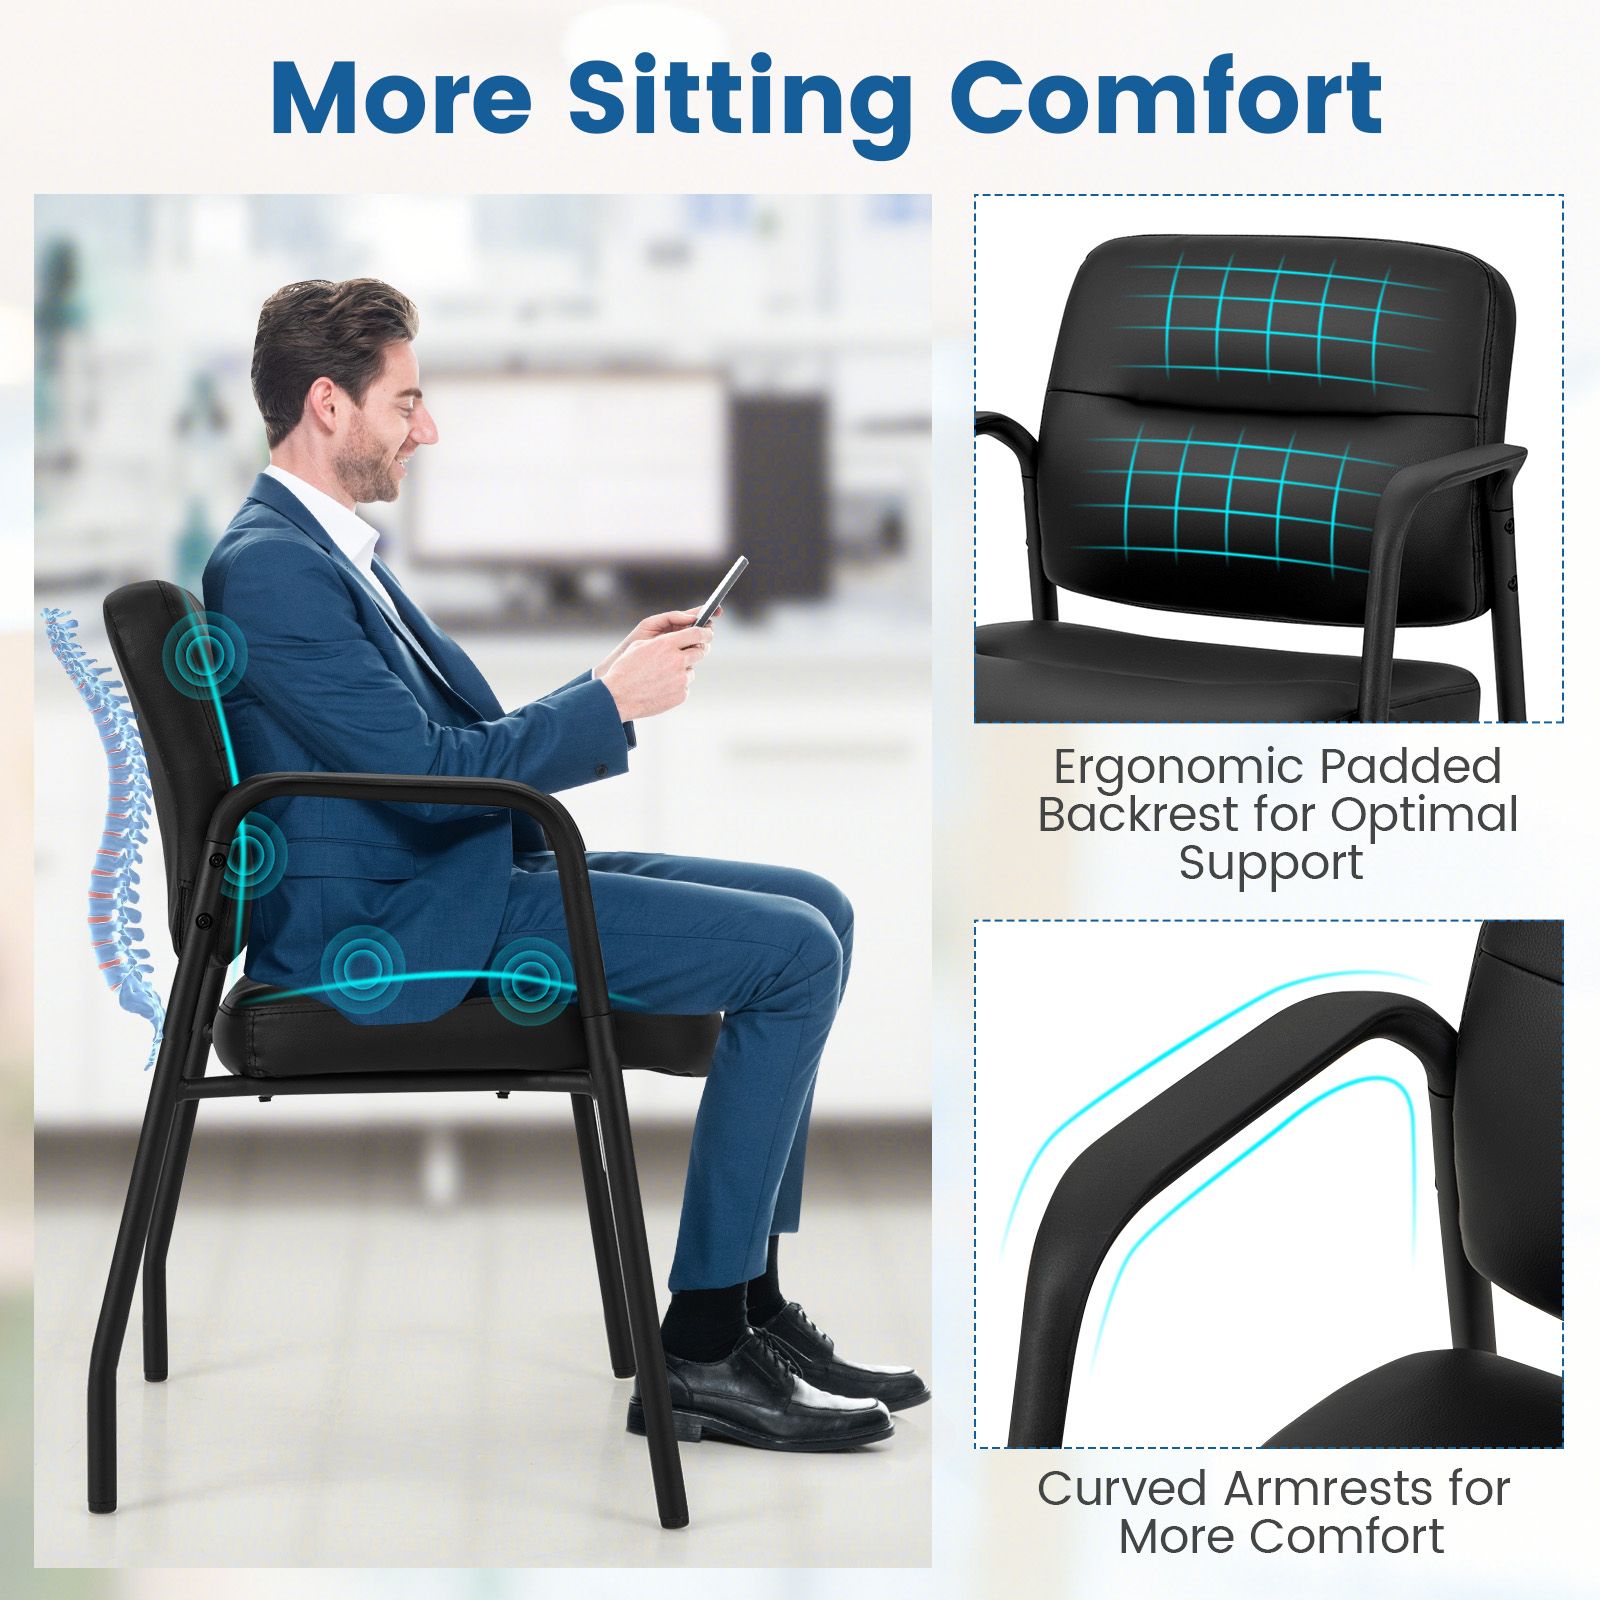 Set of 2 Waiting Room Chairs with Integrated Armrests No Wheels